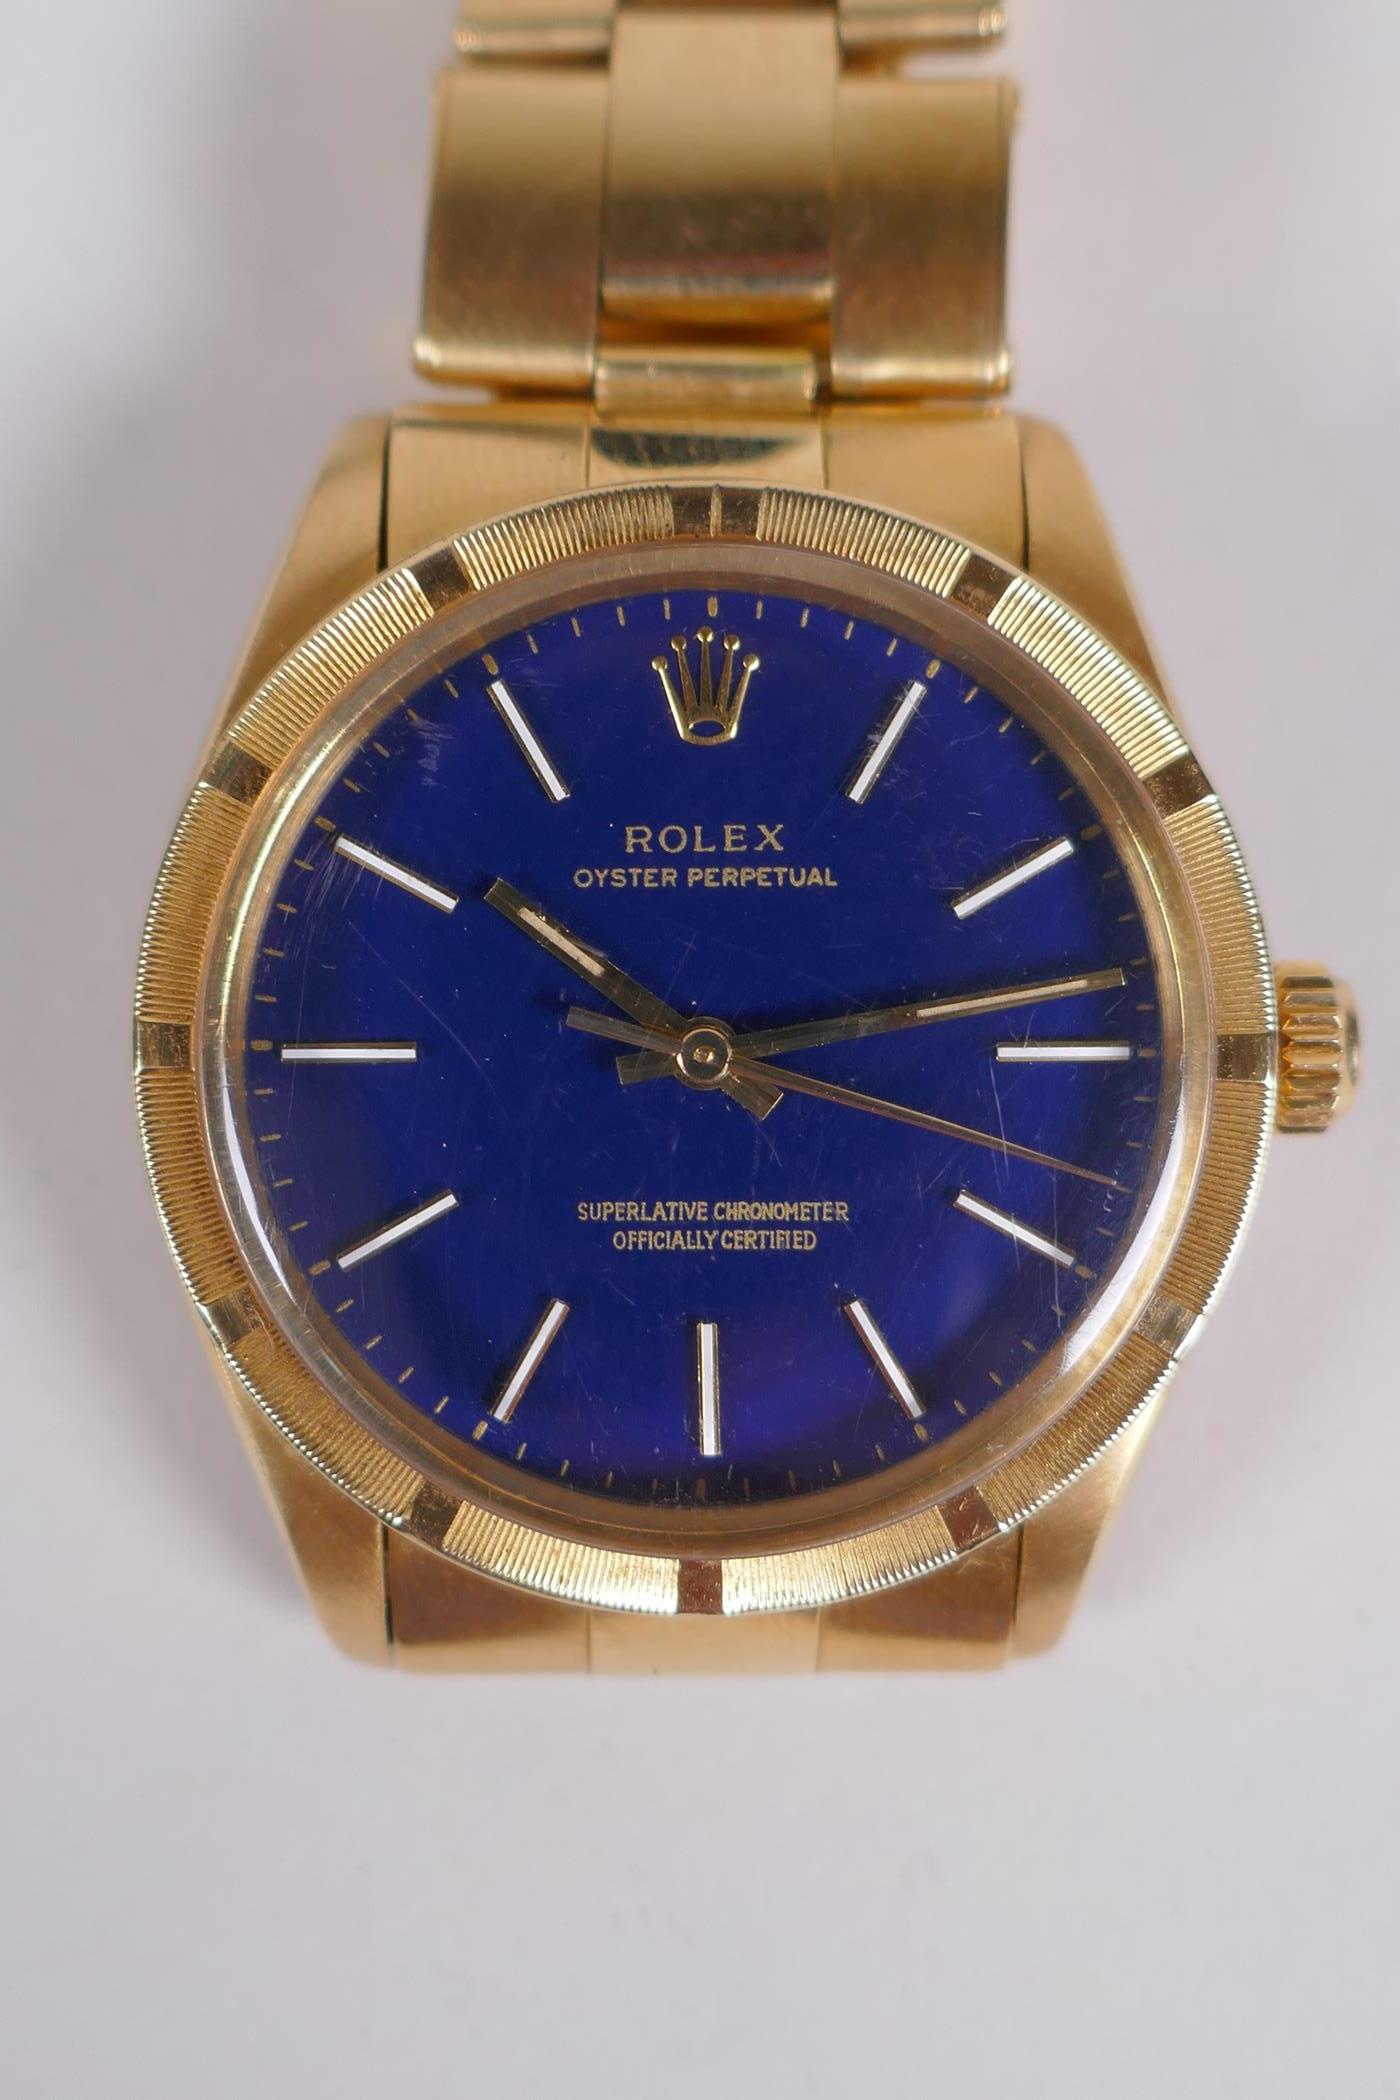 A gentleman's vintage 18ct gold Rolex Oyster Perpetual wrist watch with baton numerals, on a blue